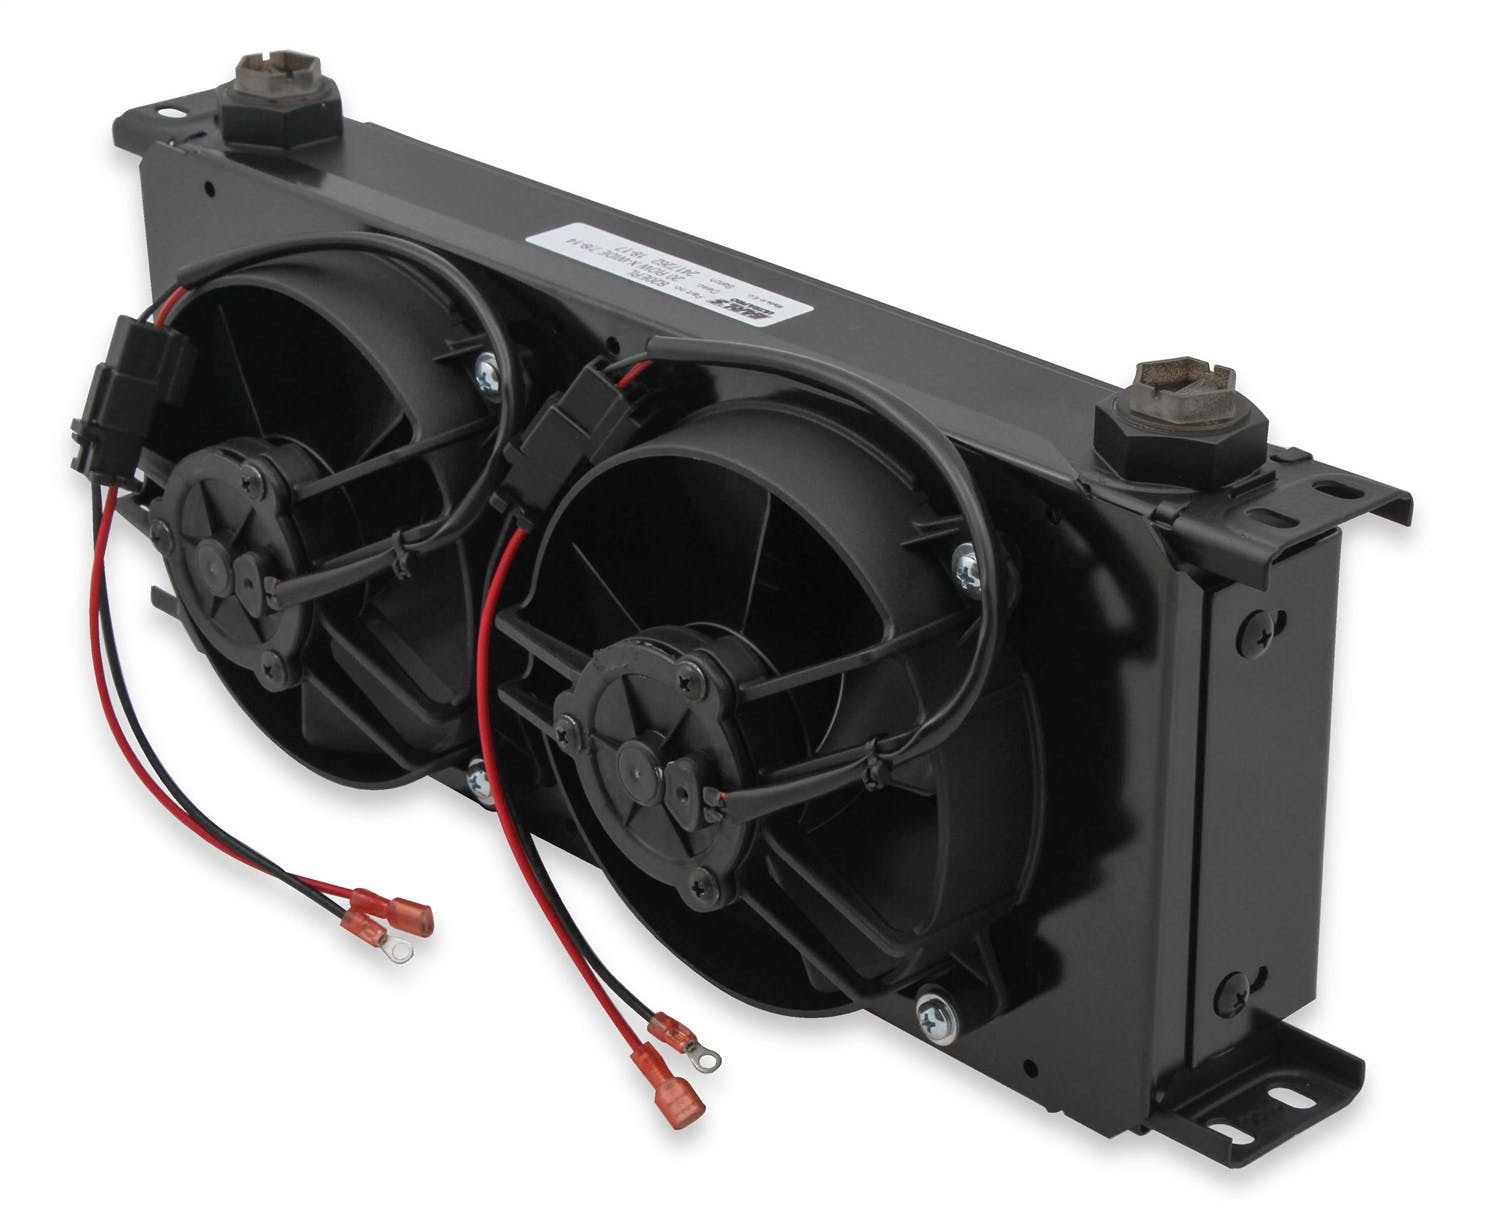 Earl's Performance Plumbing FP820ERL 20 ROW X-WIDE COOLER AND FAN PACK BLACK